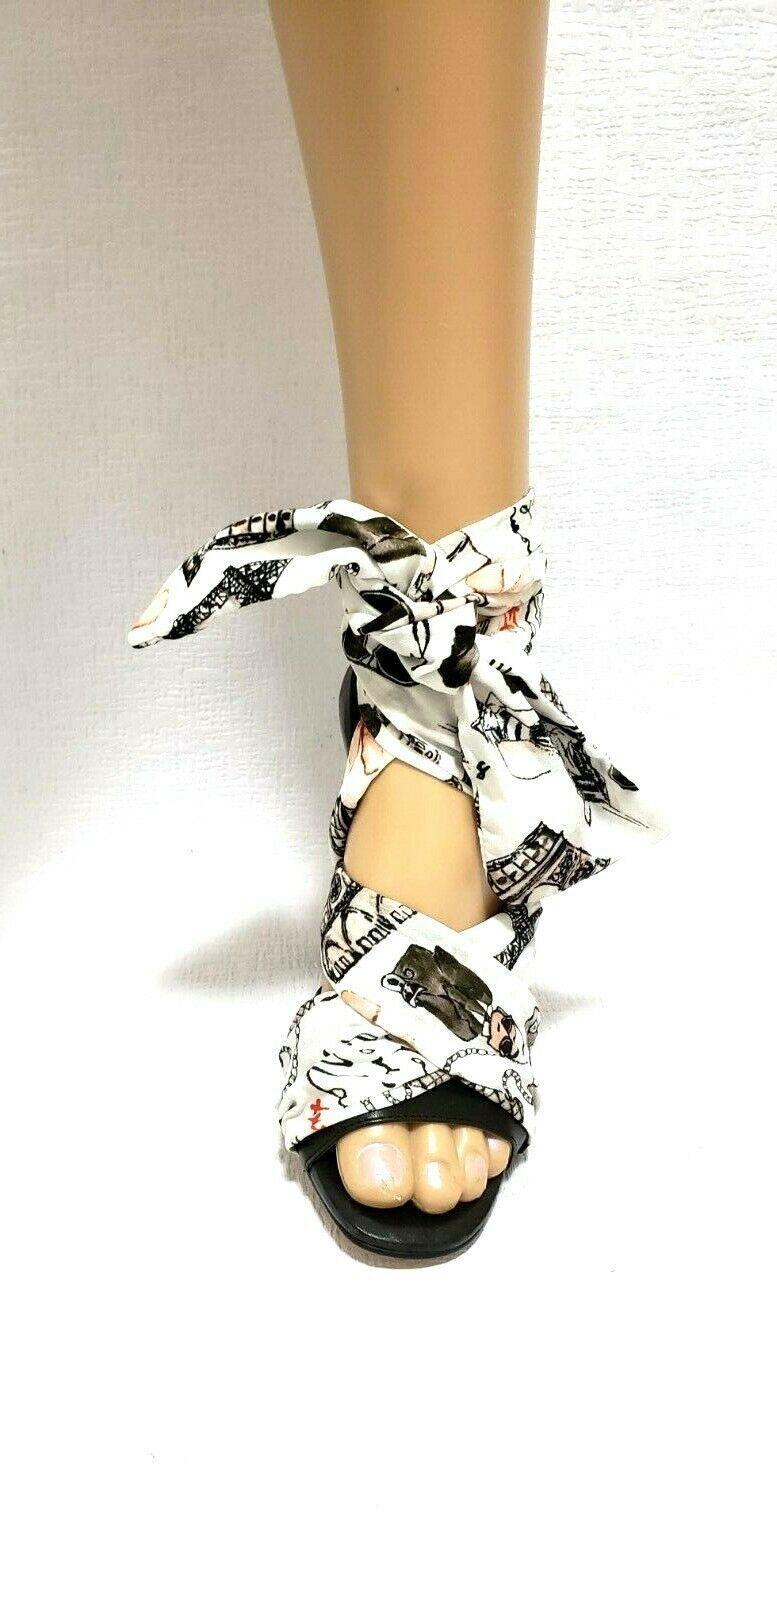 NEW RARE UNIQUE KARL LAGERFELD Leather Pump Sandals Shoes Ankle Wrap Size 6 - SVNYFancy